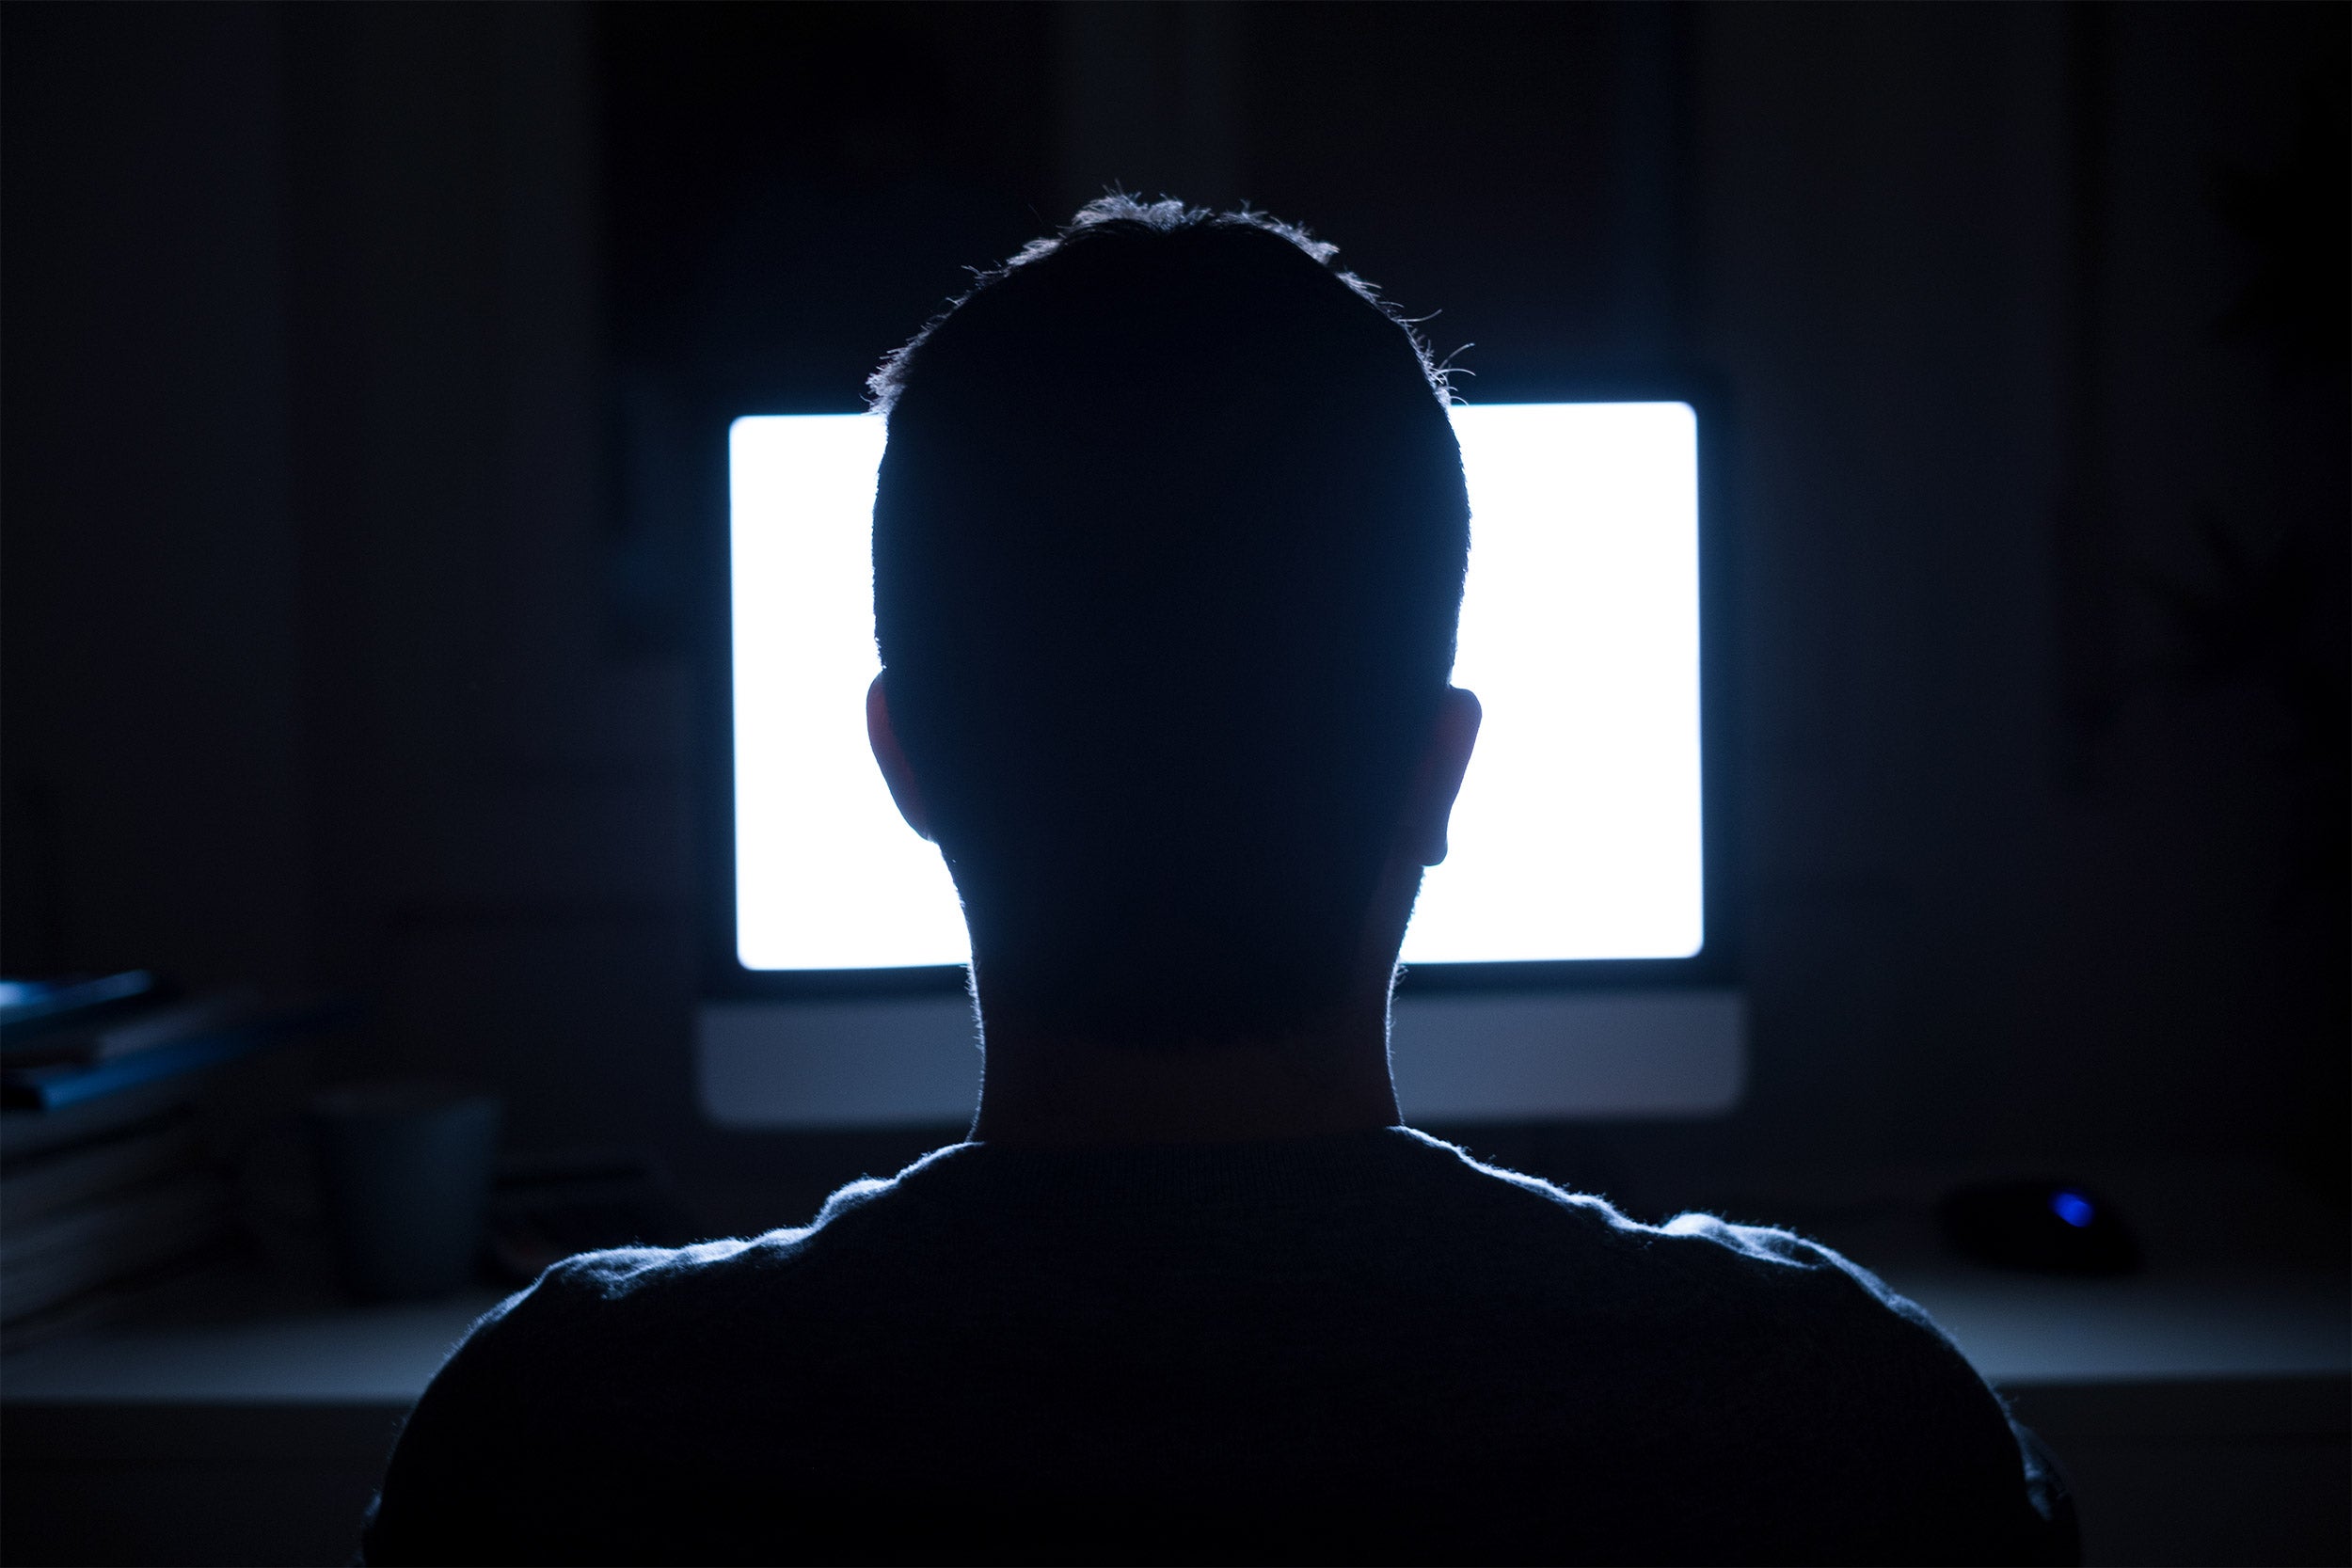 Silhouette of man's head in front of computer monitor.